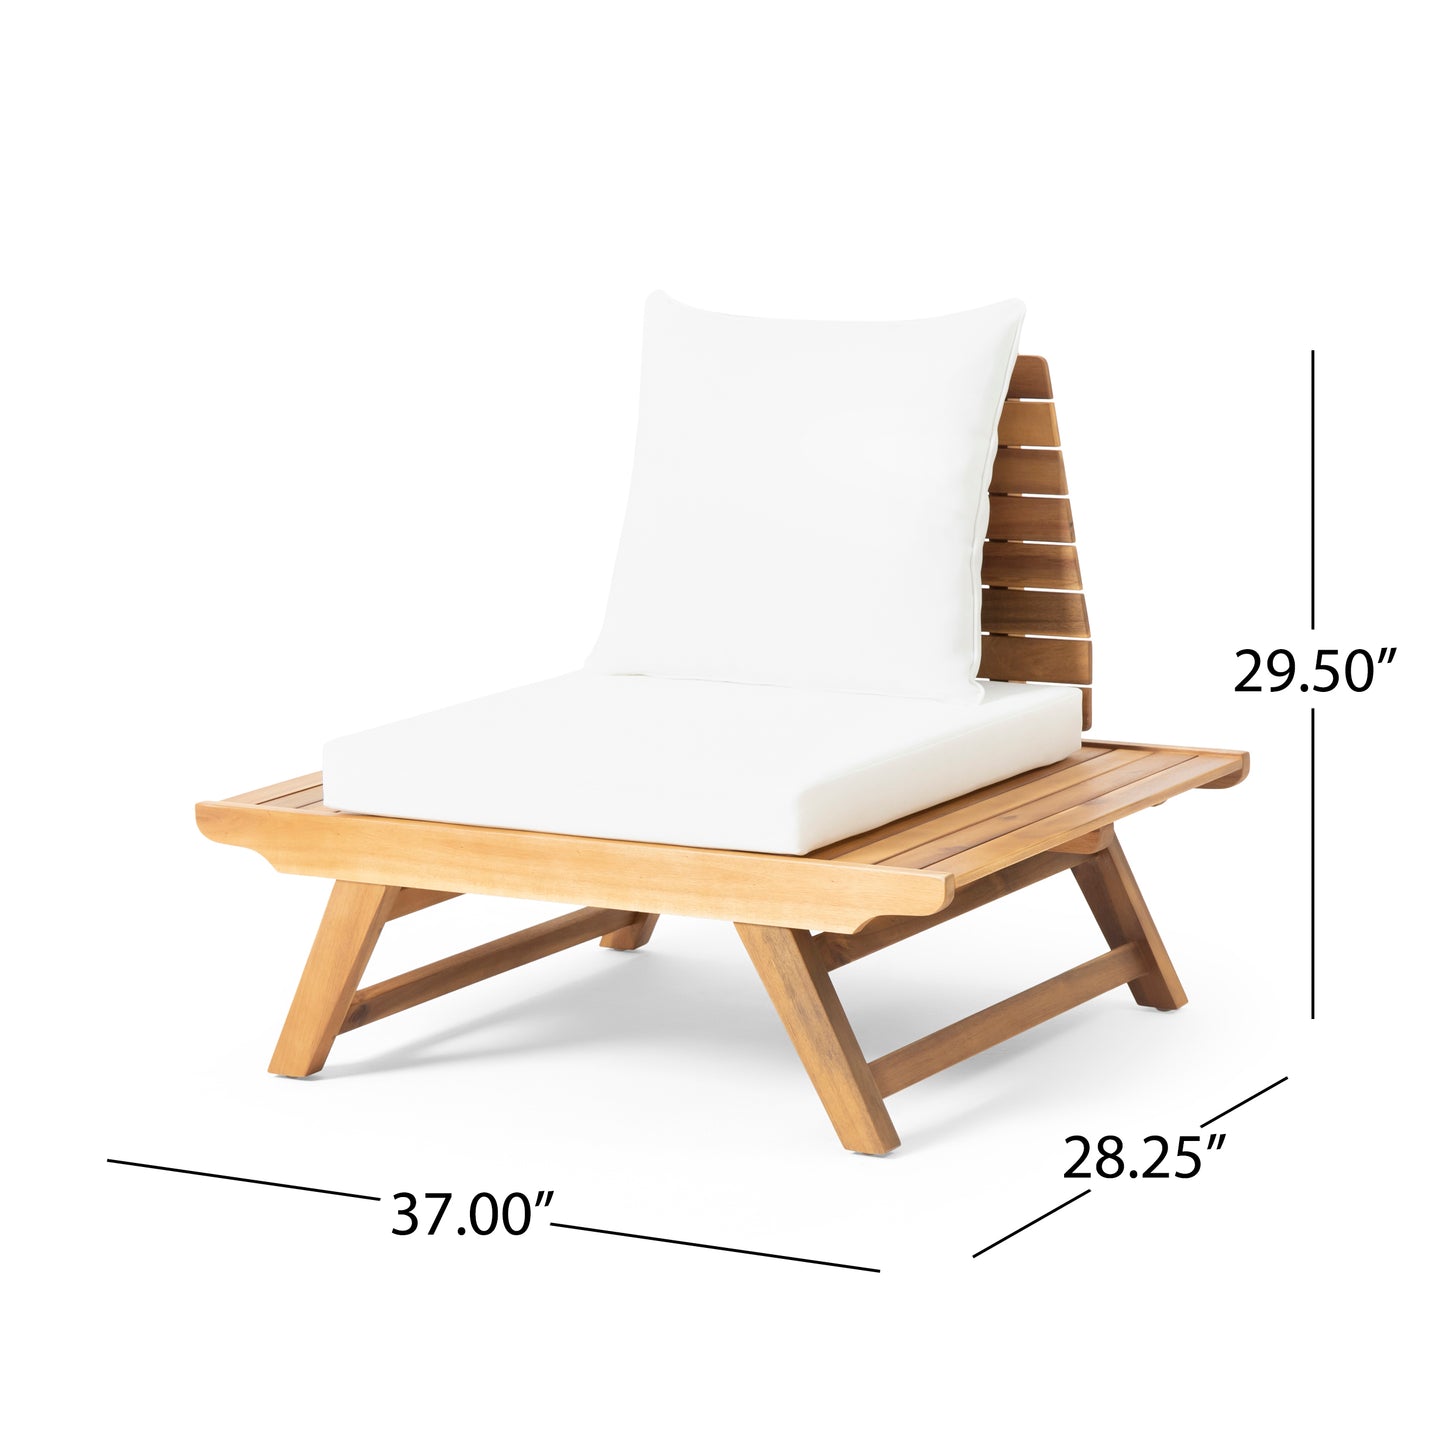 Kaiya Outdoor Acacia Wood 6 Seater Chat Set with Side Table and Coffee Table